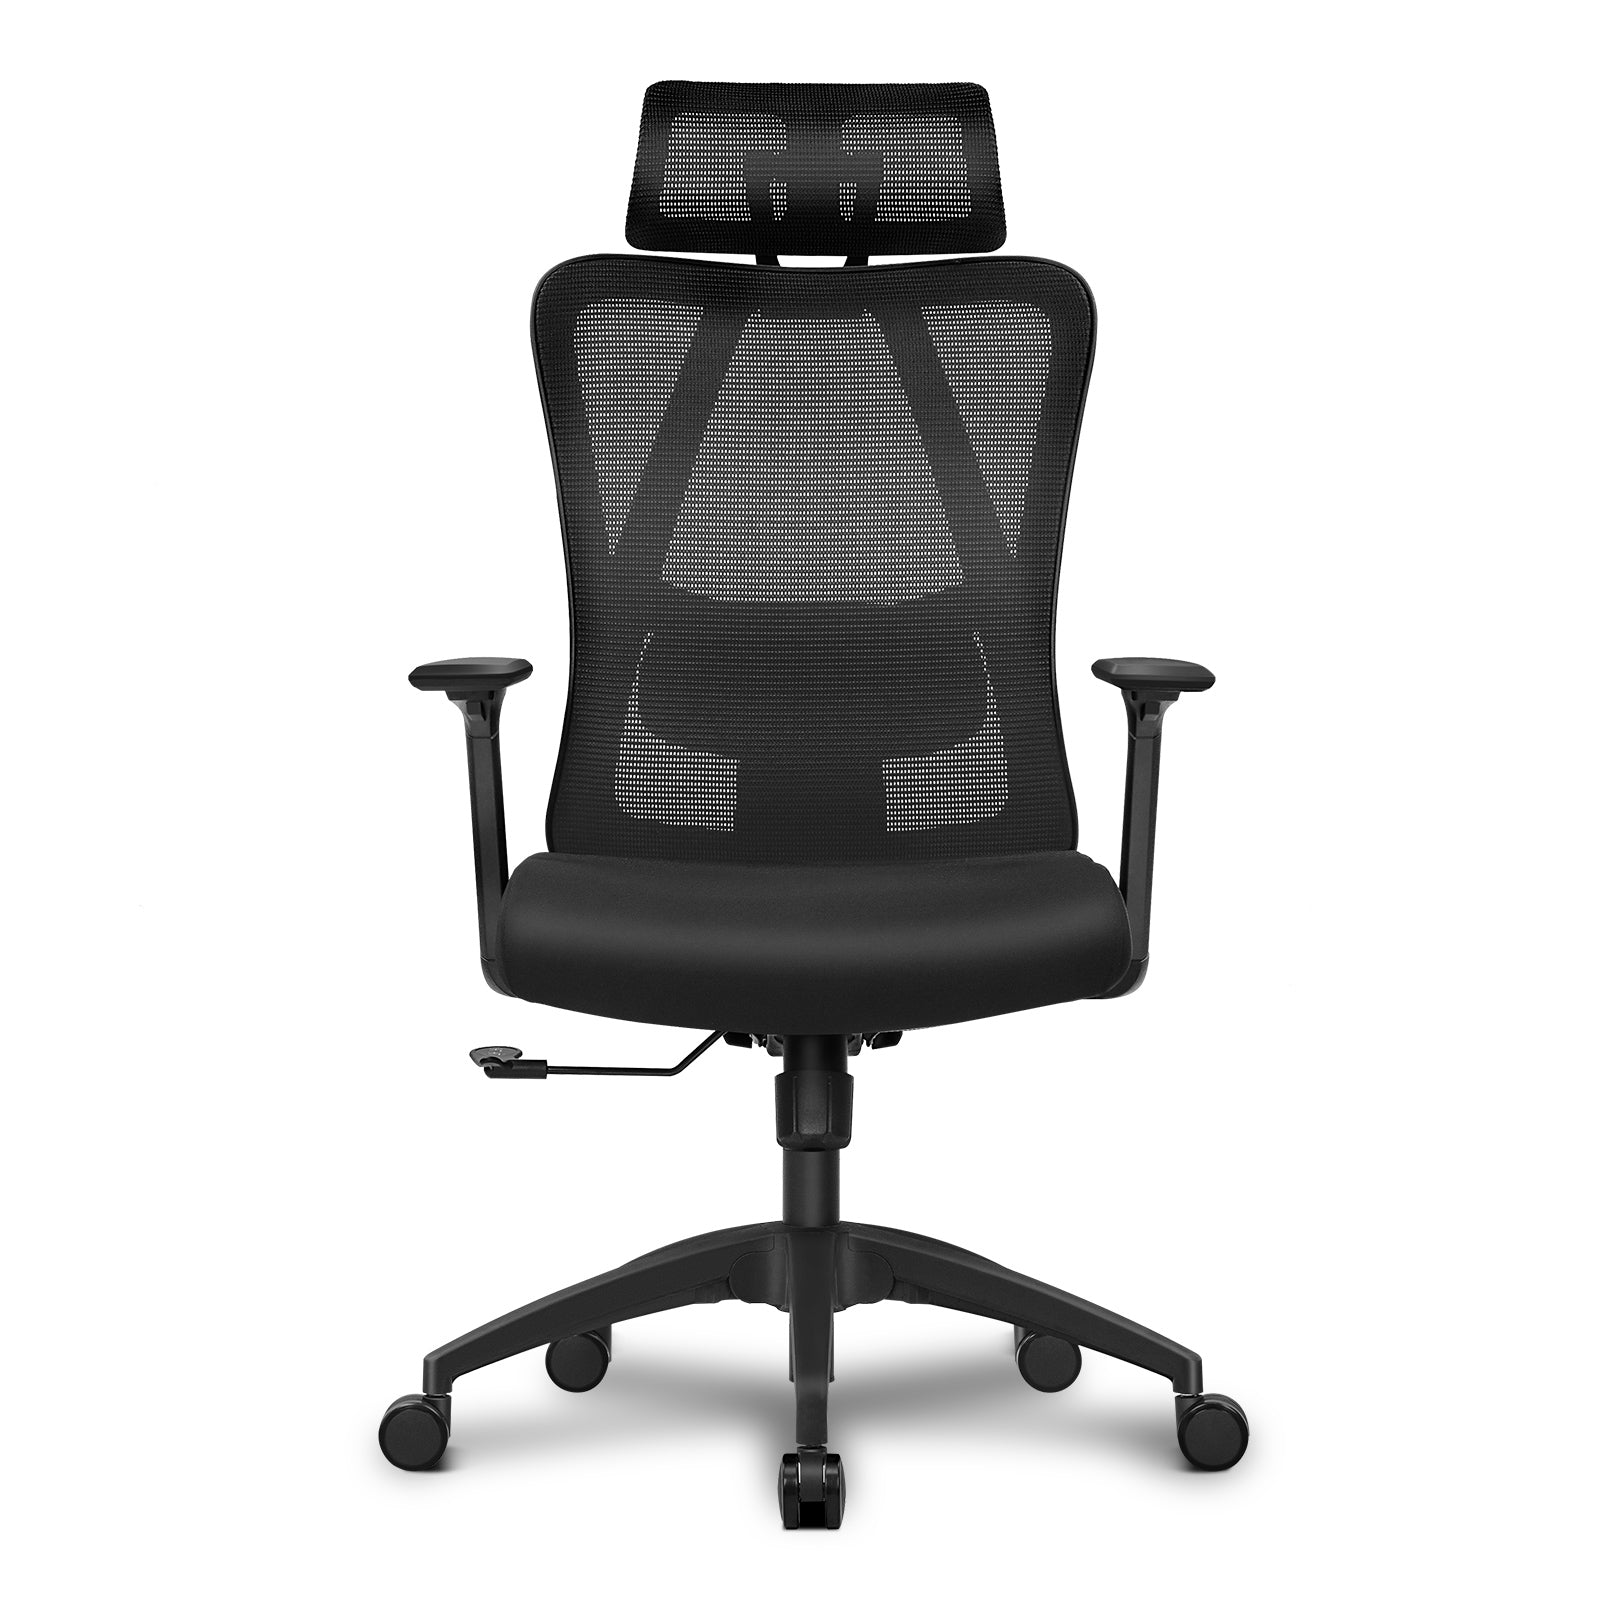 Ergonomic Black Mesh High Back Office Chair With Adjustable Lumbar Support 18HT